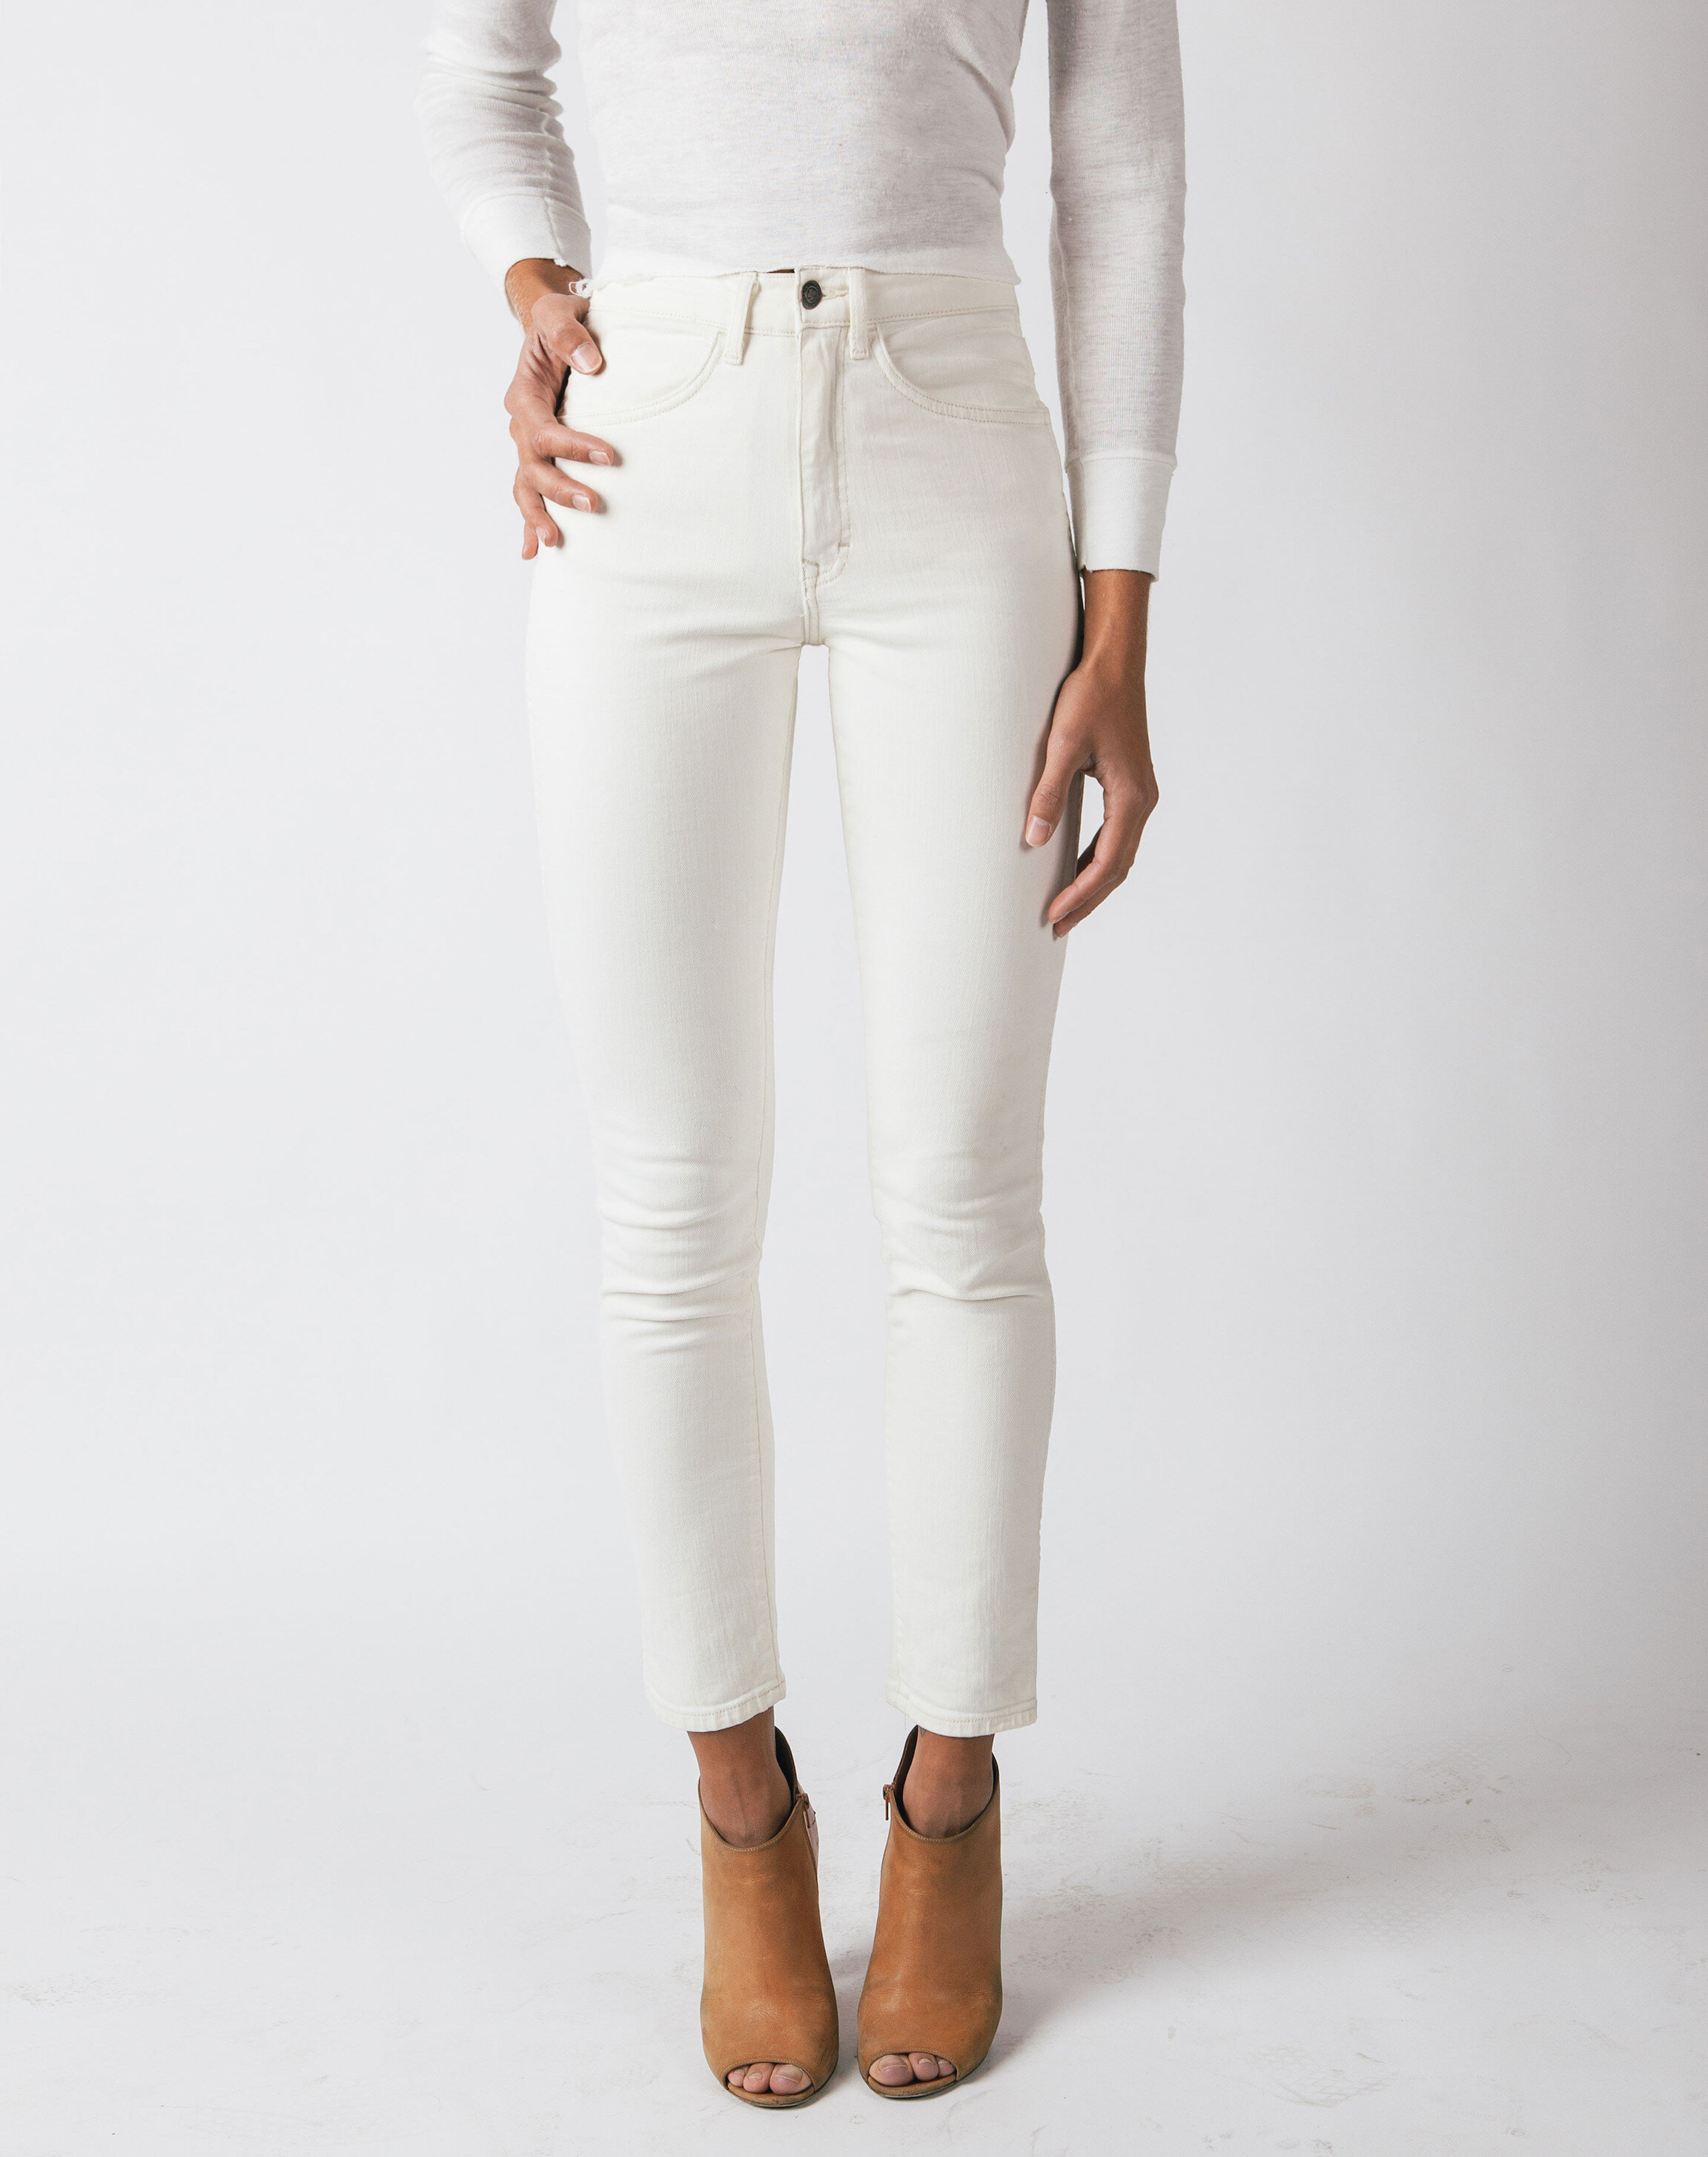 11 Sustainable White Denim Jeans You Can Wear All Summer - The Good Trade